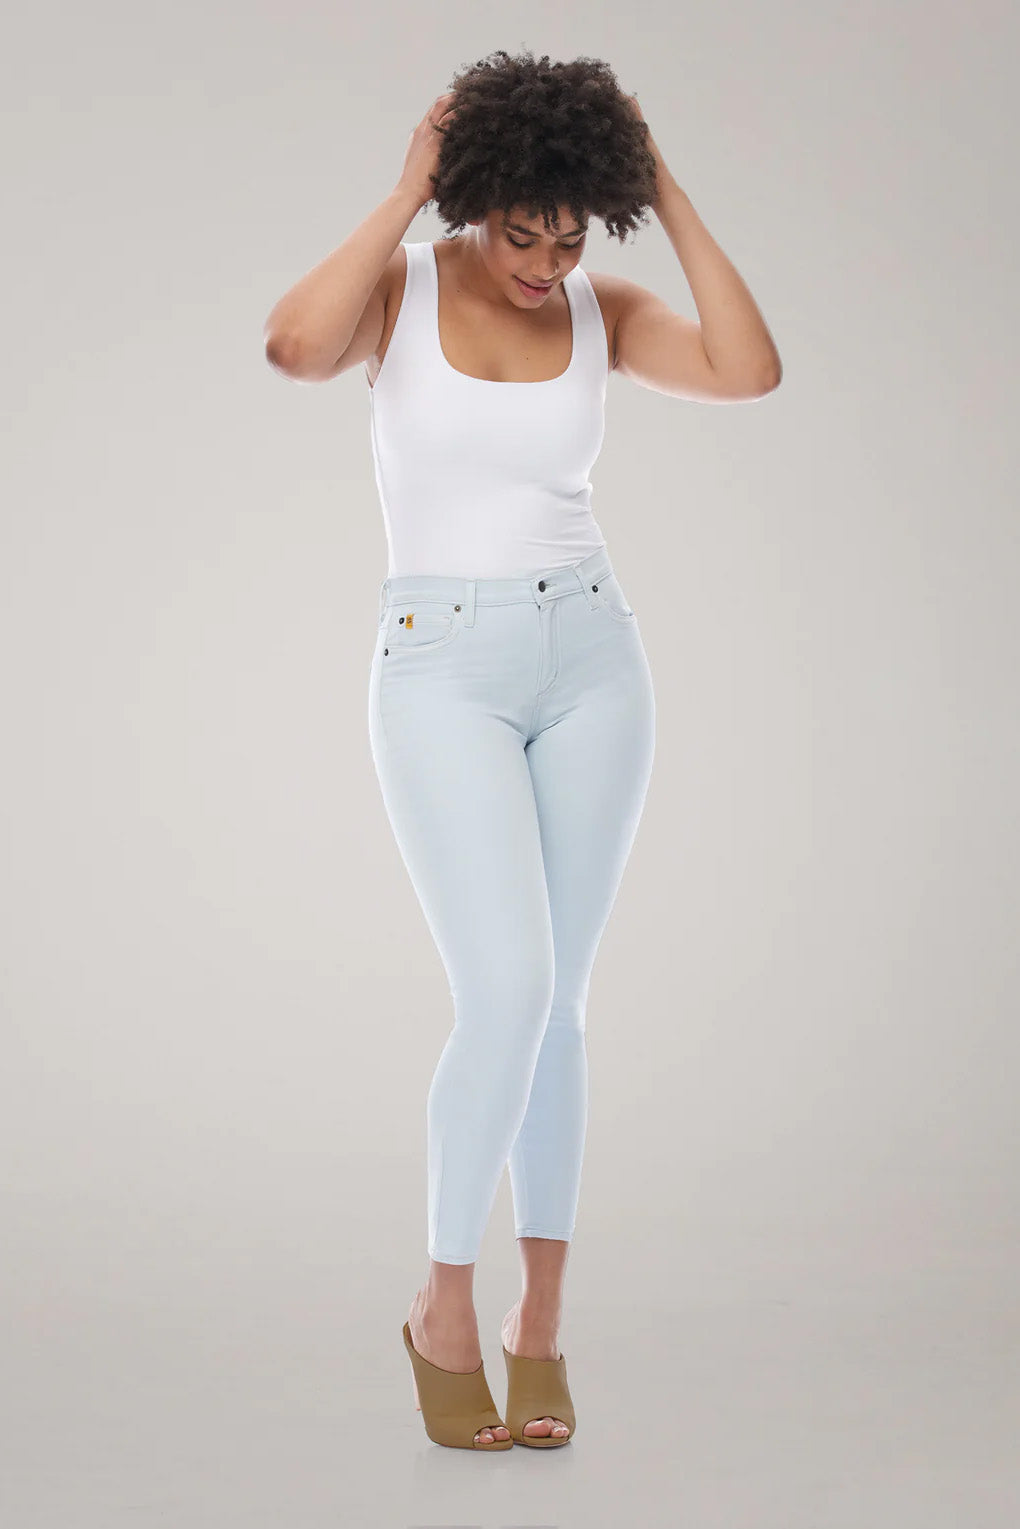 Eclipse RACHEL Classic Rise Skinny Yoga Jeans, pale blue, classic rise, skinny fit, cropped, travel denim, sizes 25-34, made in Canada